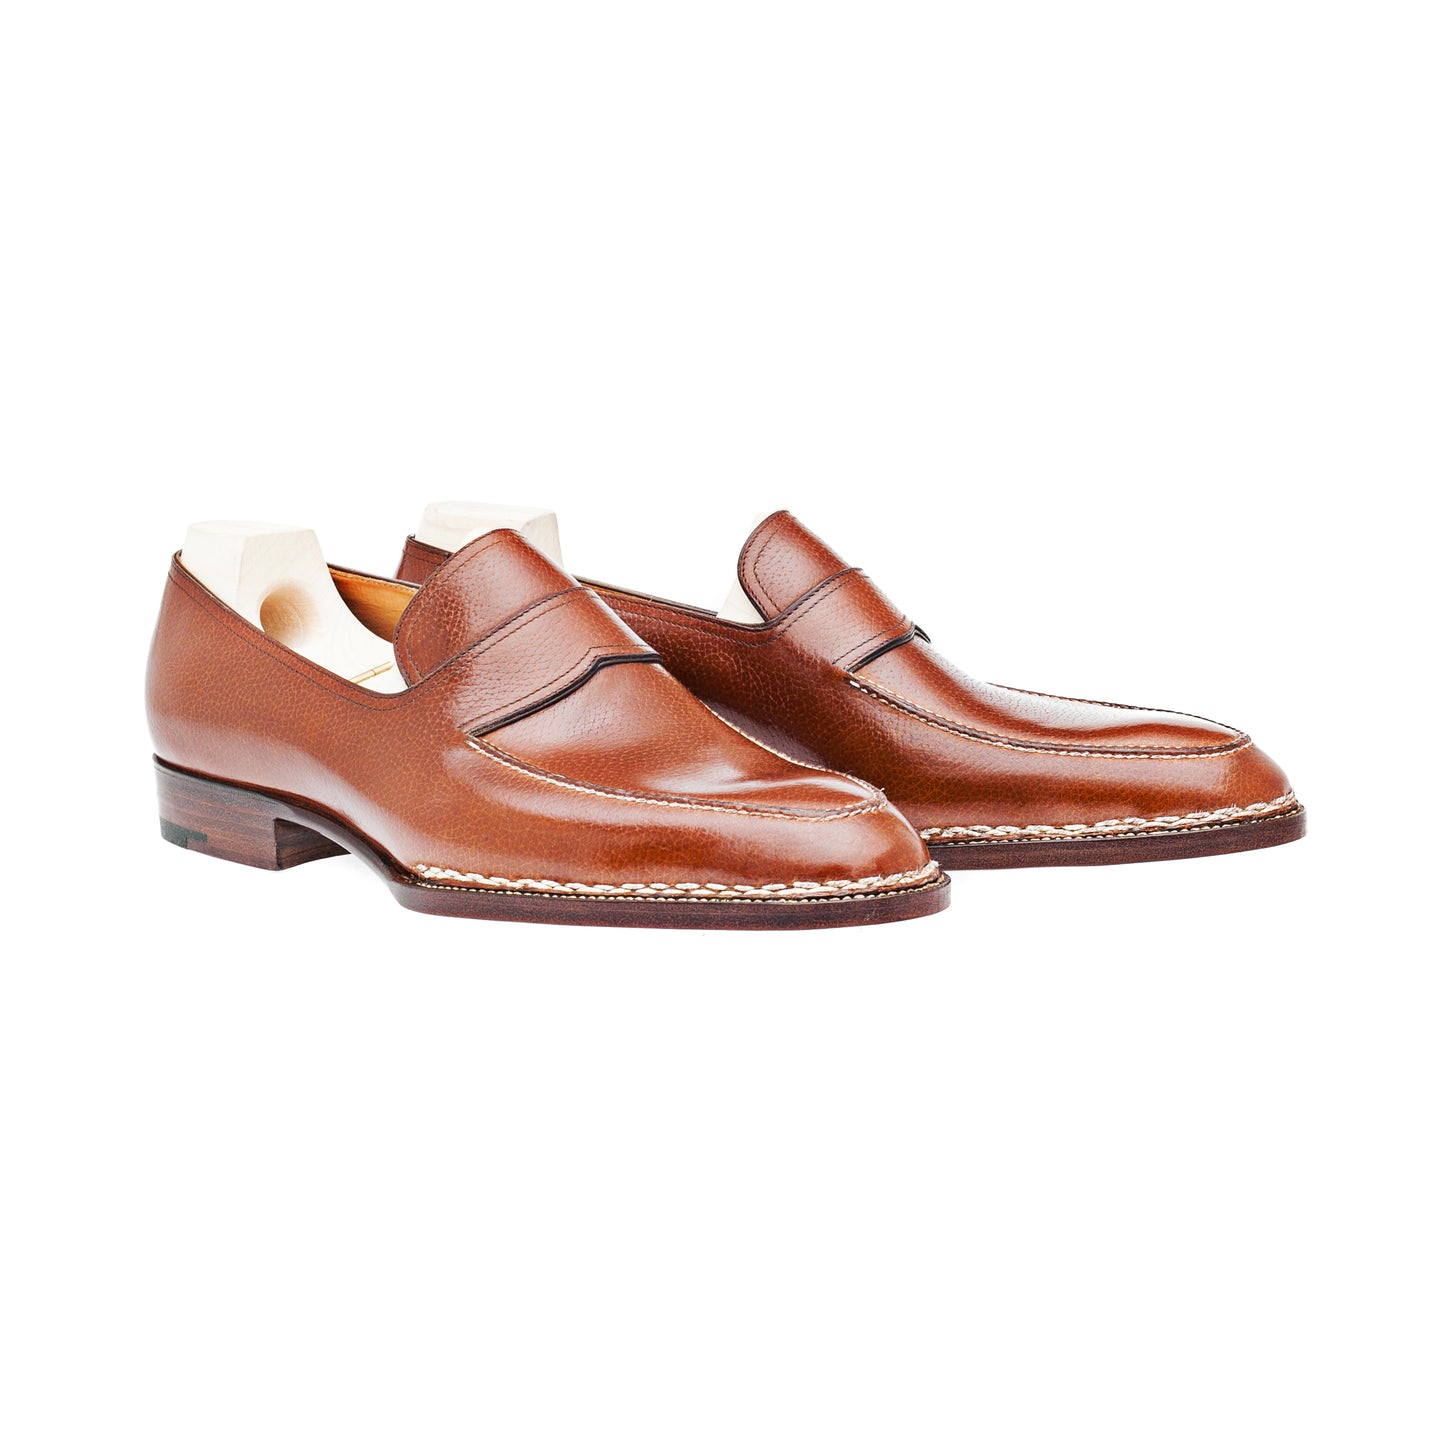 Norwegian Loafer with hand sewn apron in Cognac Inca calf leather